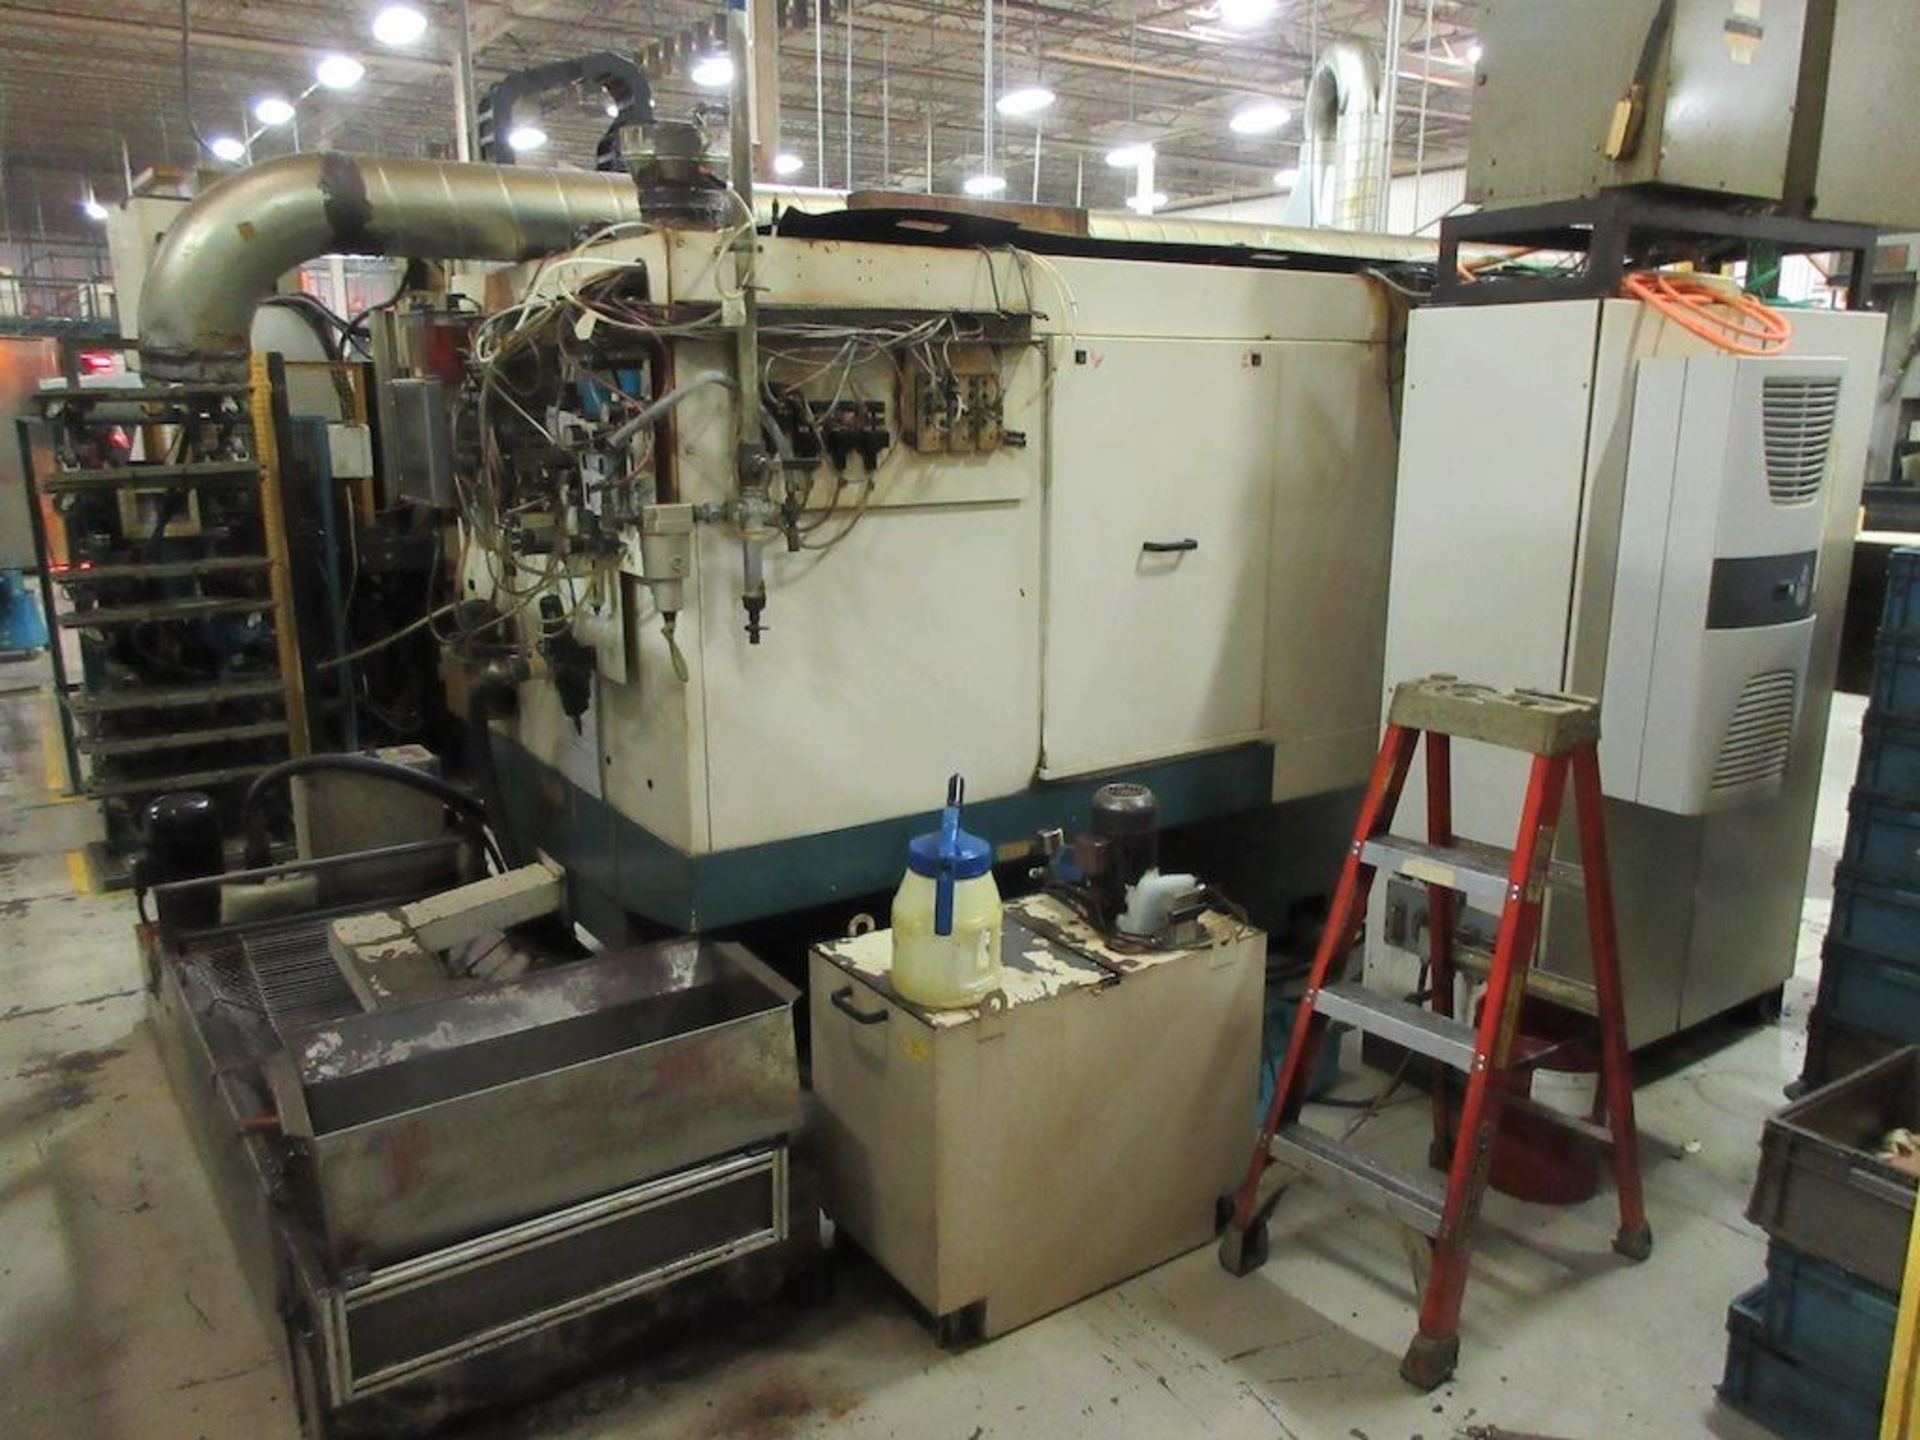 2006 STUDER, CNC Grinders, Model S151, High Frequency Drive Spindle, Swing diameter 14.17", center - Image 8 of 9